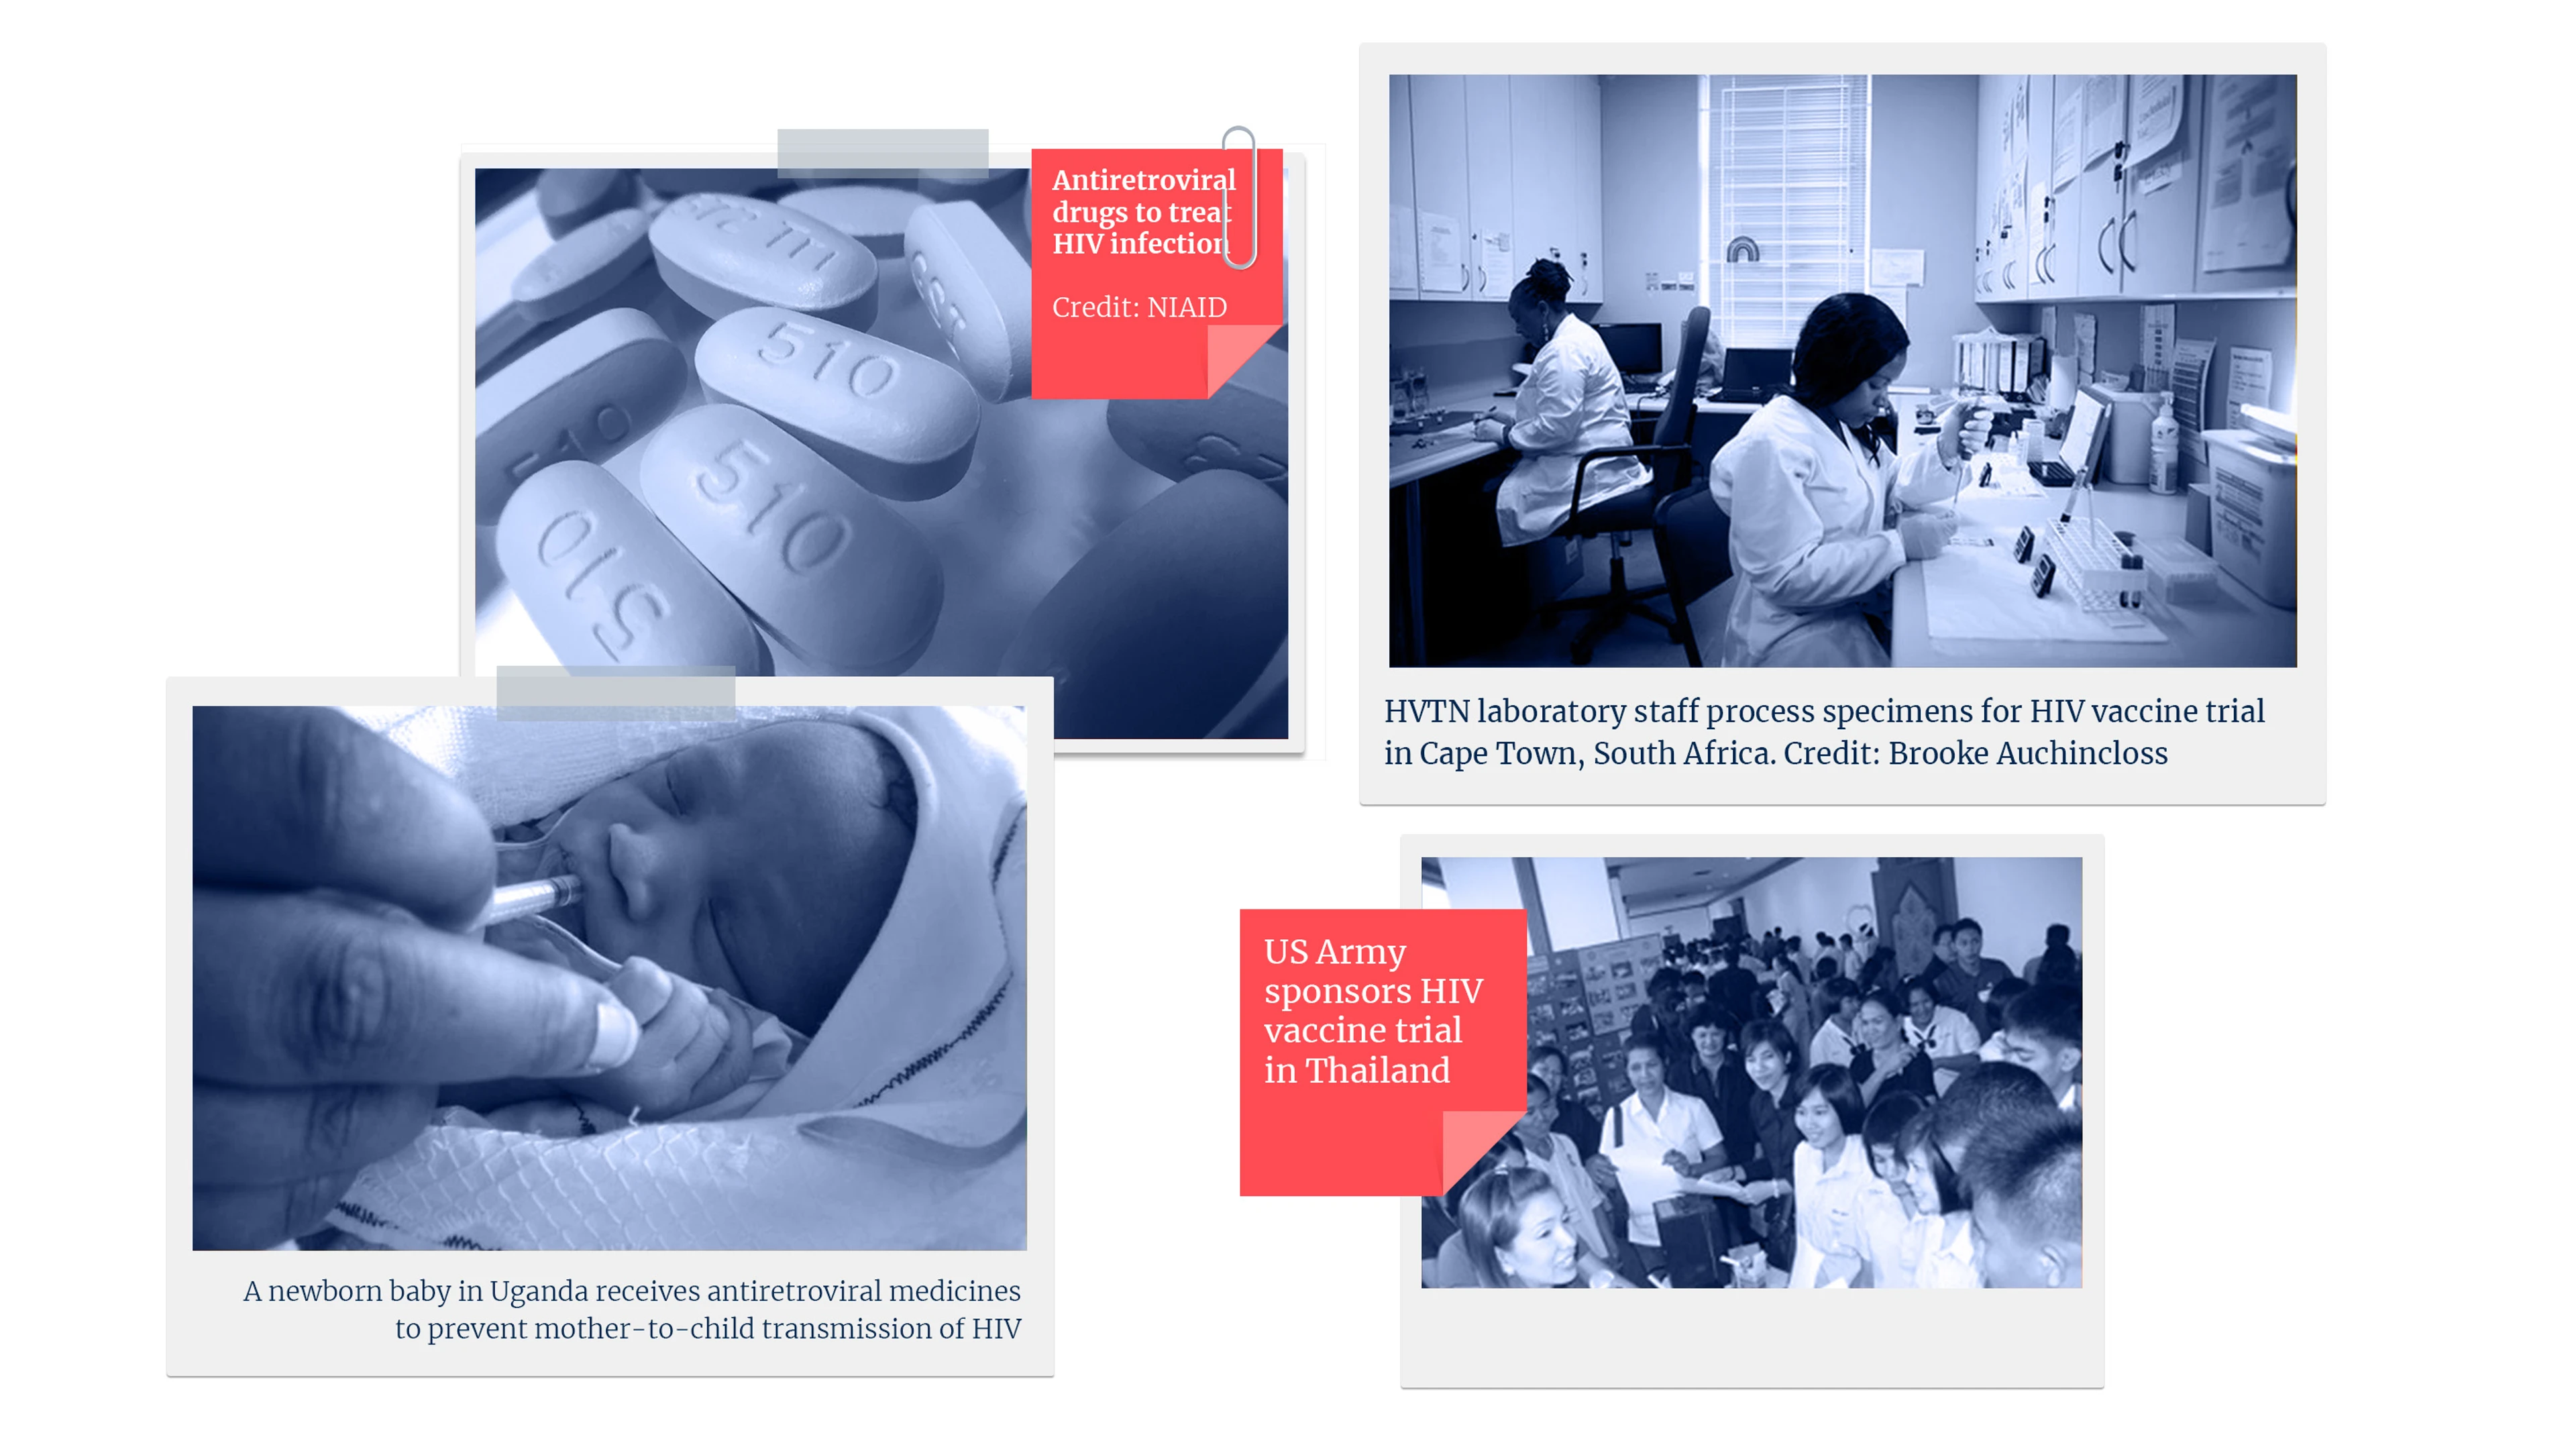 Collage of photos showing vaccine trials and antiretroviral treatments